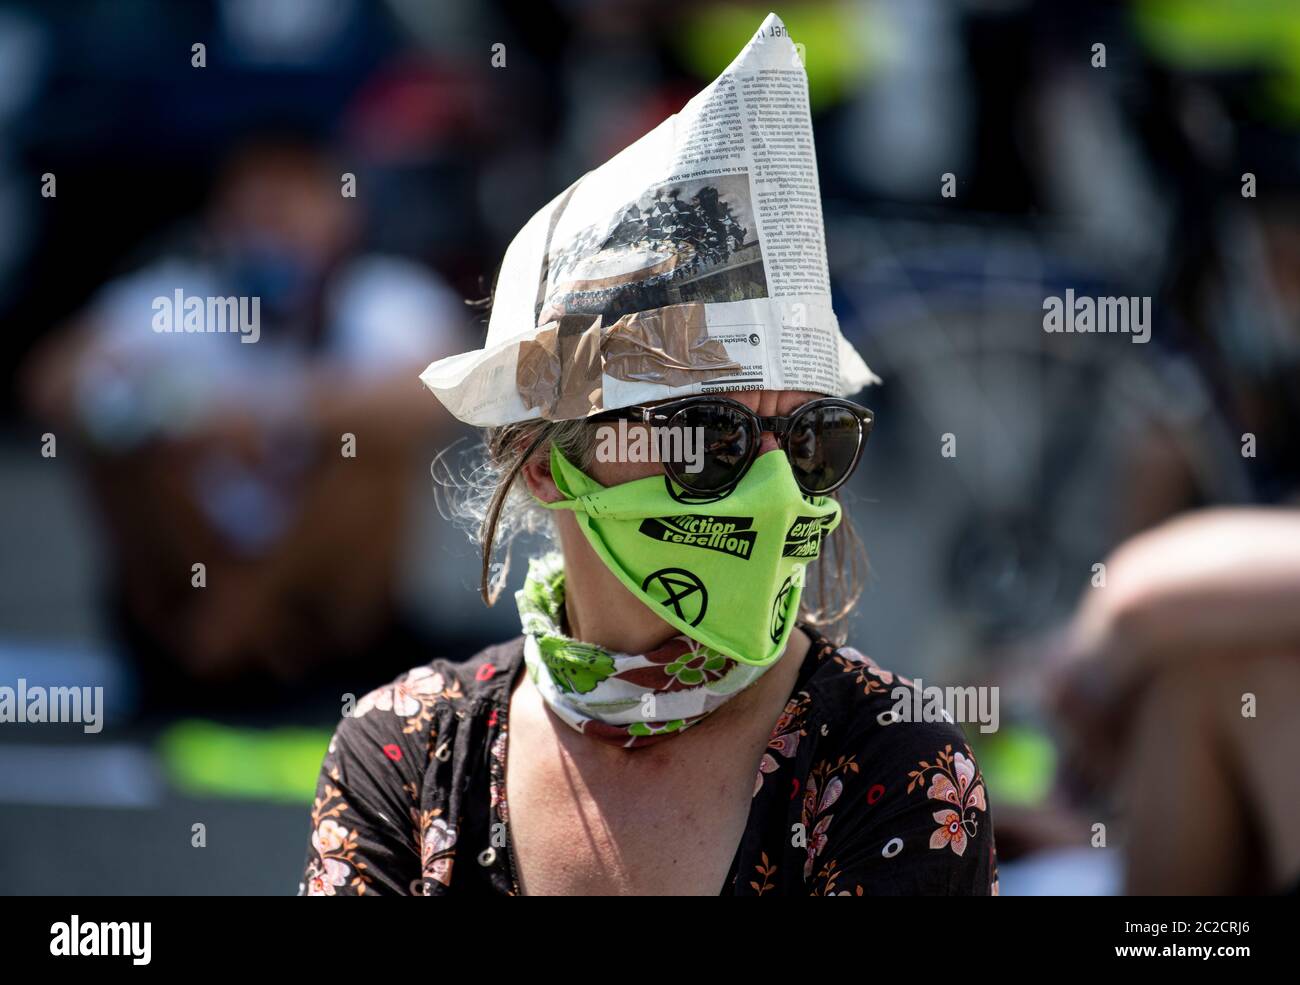 Berlin, Germany. 17th June, 2020. Demonstrators of Extinction Rebellion block the street in front of the headquarters of the German Association of the Automotive Industry (VDA). Credit: Fabian Sommer/dpa/Alamy Live News Stock Photo